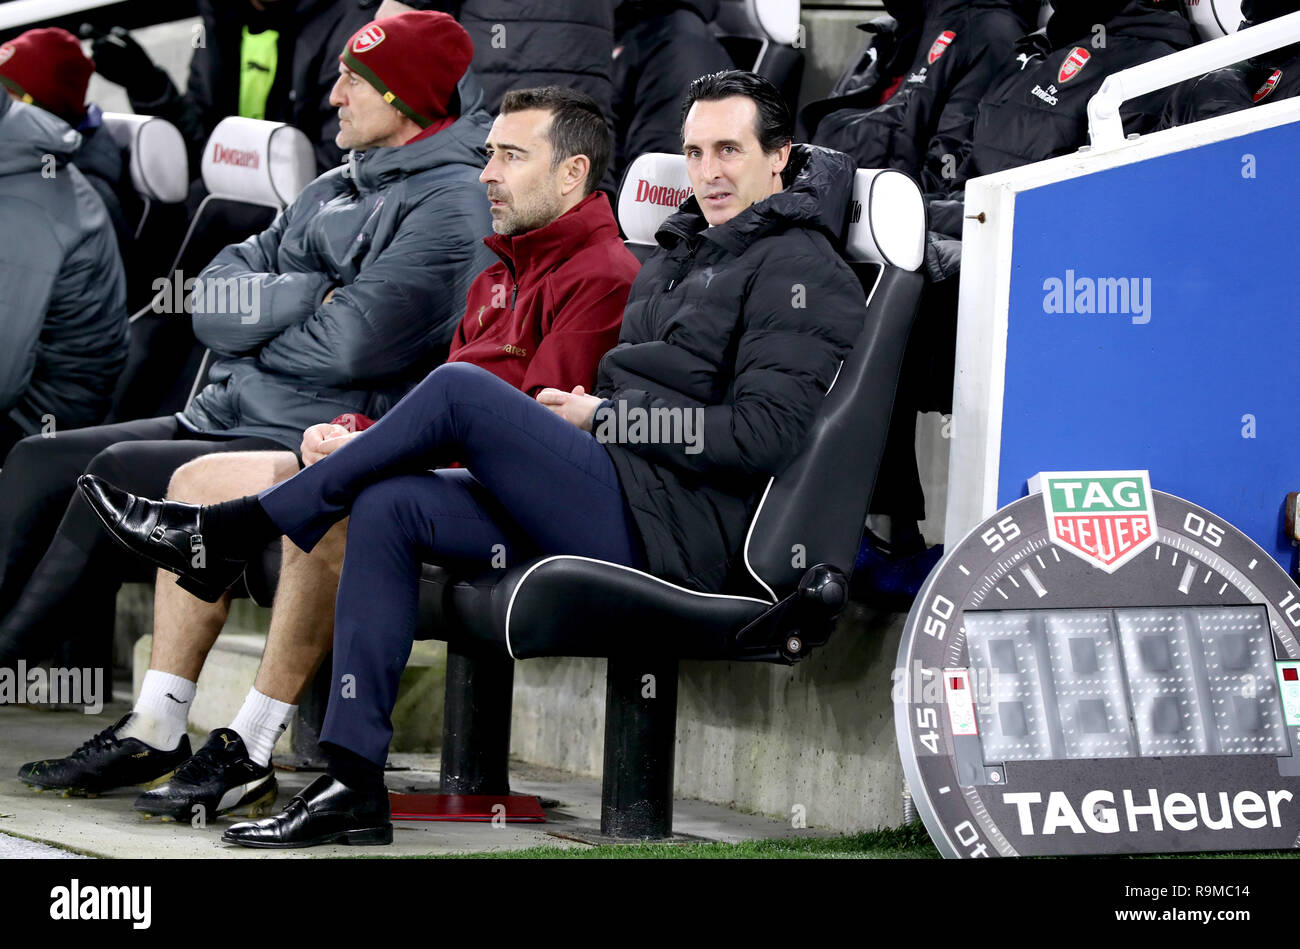 Arsenal manager Unai Emery prior to the beginning of the Premier League match at the AMEX Stadium, Brighton. PRESS ASSOCIATION Photo. Picture date: Wednesday December 26, 2018. See PA story SOCCER Brighton. Photo credit should read: Gareth Fuller/PA Wire. RESTRICTIONS: No use with unauthorised audio, video, data, fixture lists, club/league logos or 'live' services. Online in-match use limited to 120 images, no video emulation. No use in betting, games or single club/league/player publications. Stock Photo